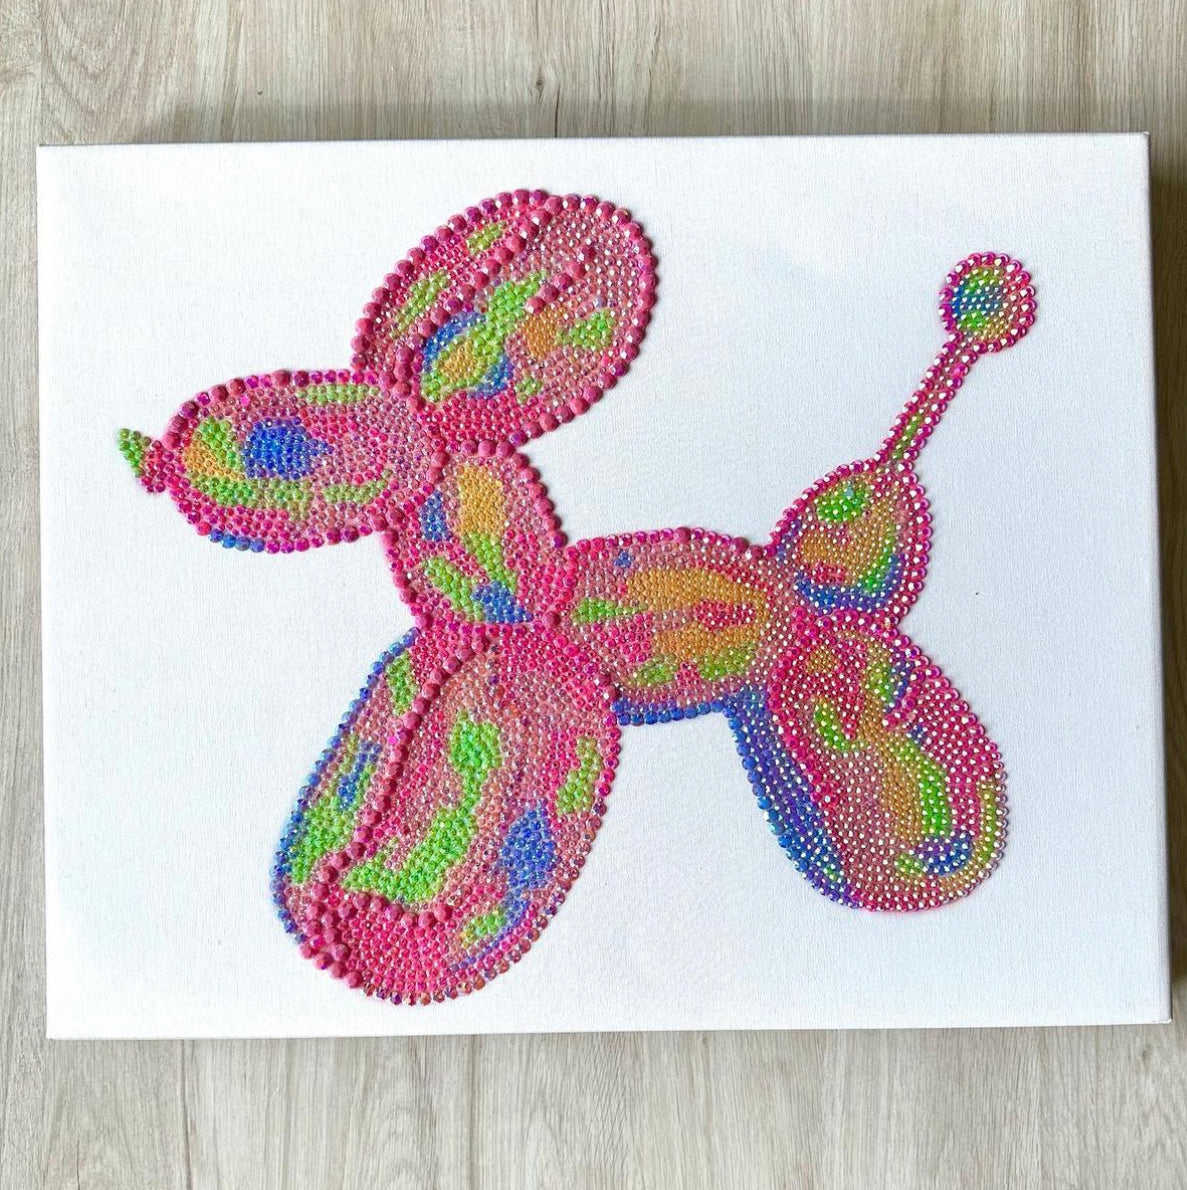 Balloon dog 16x20 made to order